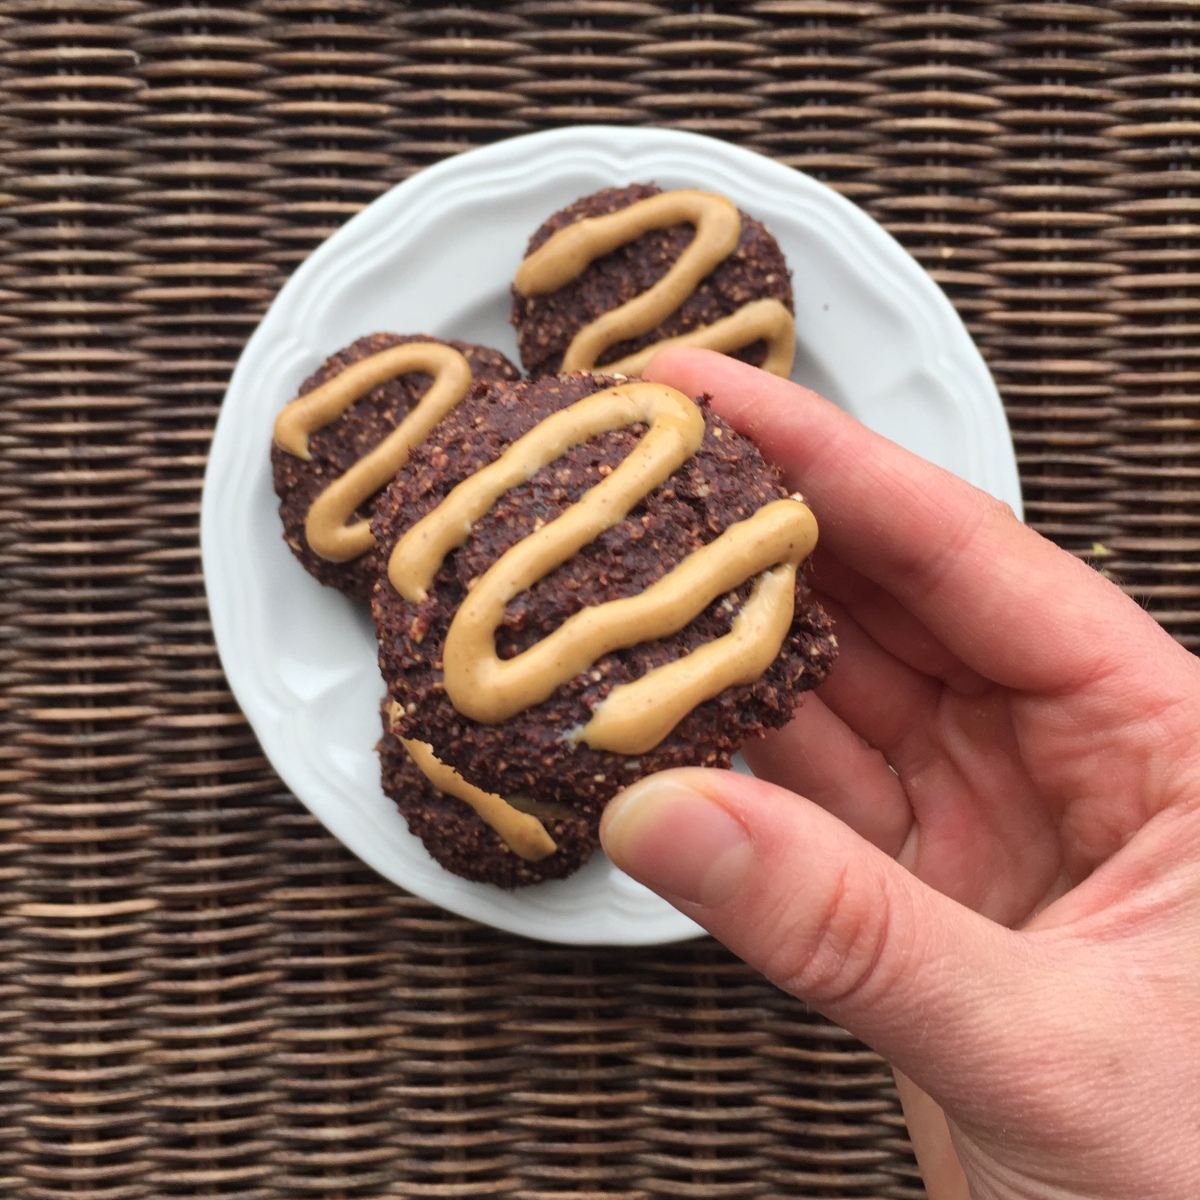 Chocolate Peanut Butter Drizzle Cookies